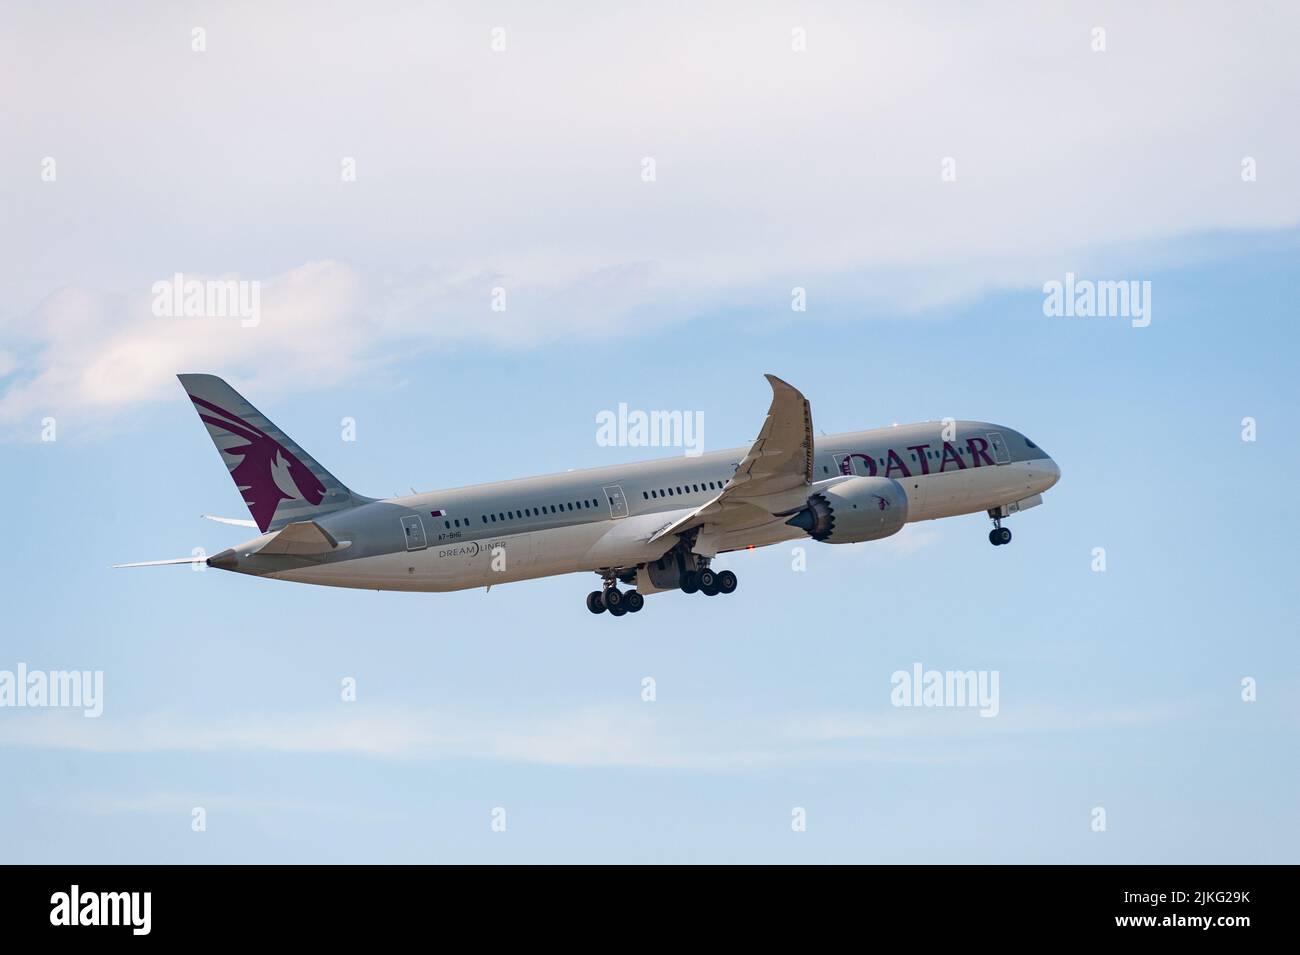 03.06.2022, Germany, Berlin, Berlin - Europe - A Boeing 787-9 Dreamliner passenger aircraft of Qatar Airways with registration A7-BHG taking off from Stock Photo